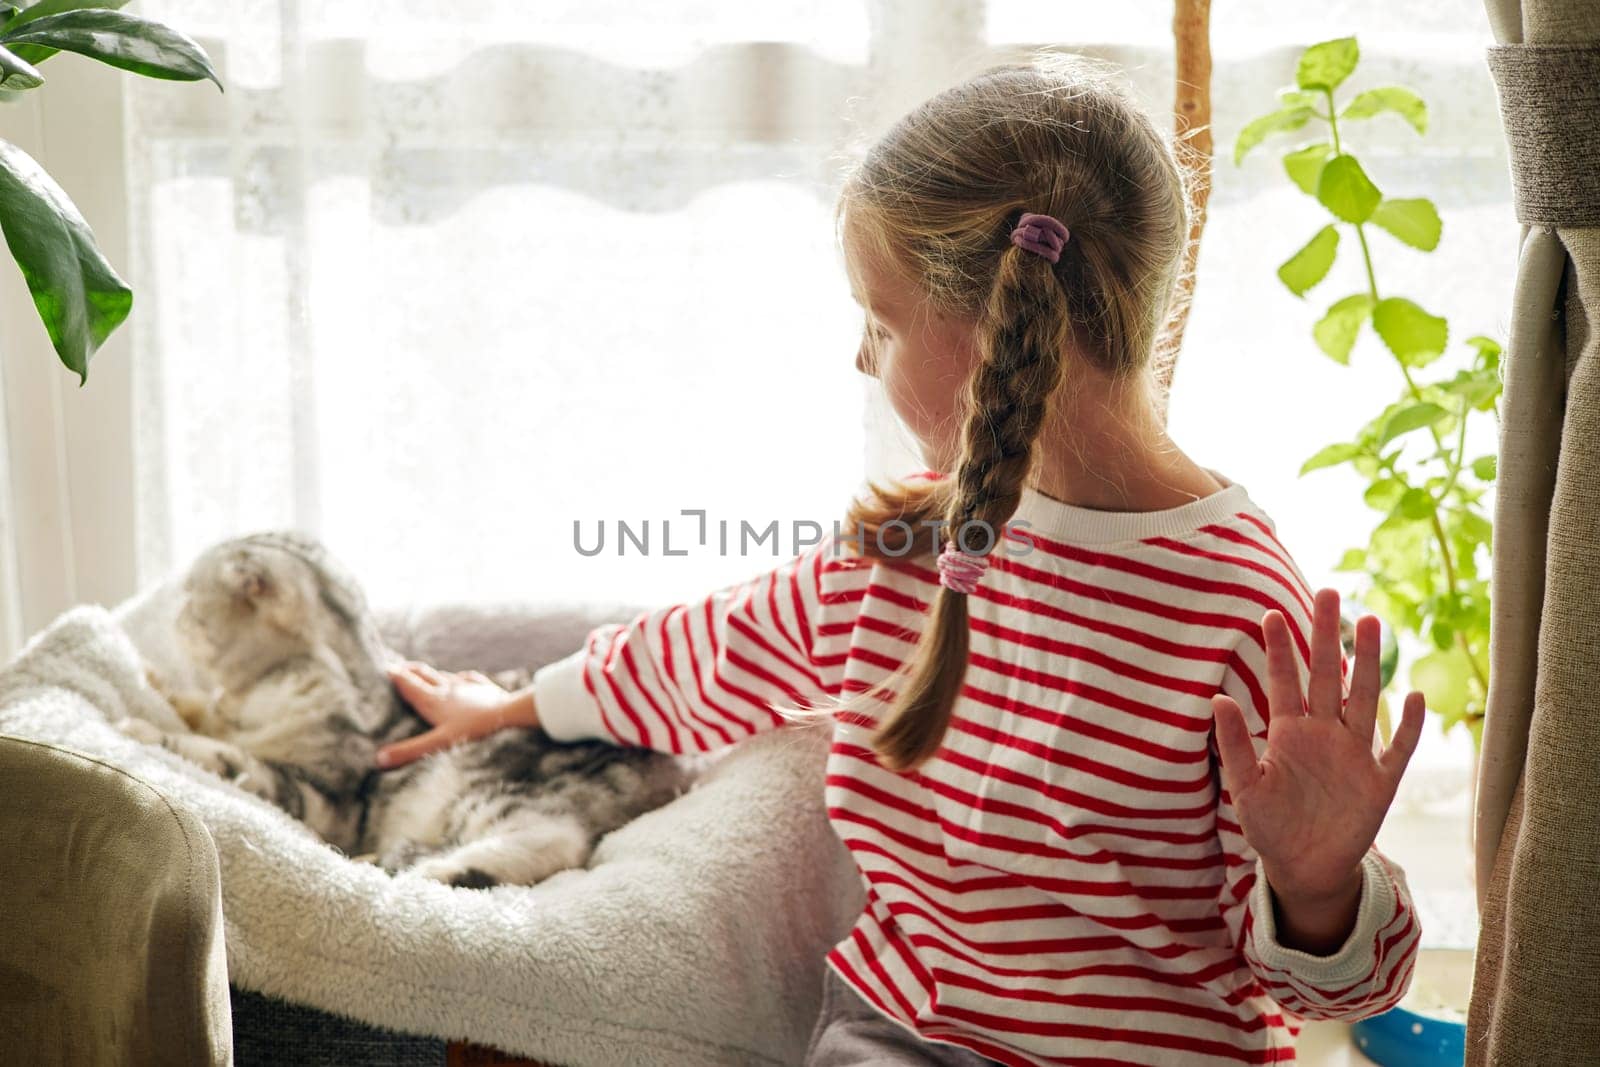 Little girl with plaits strokes purebred cat on windowsill by Demkat